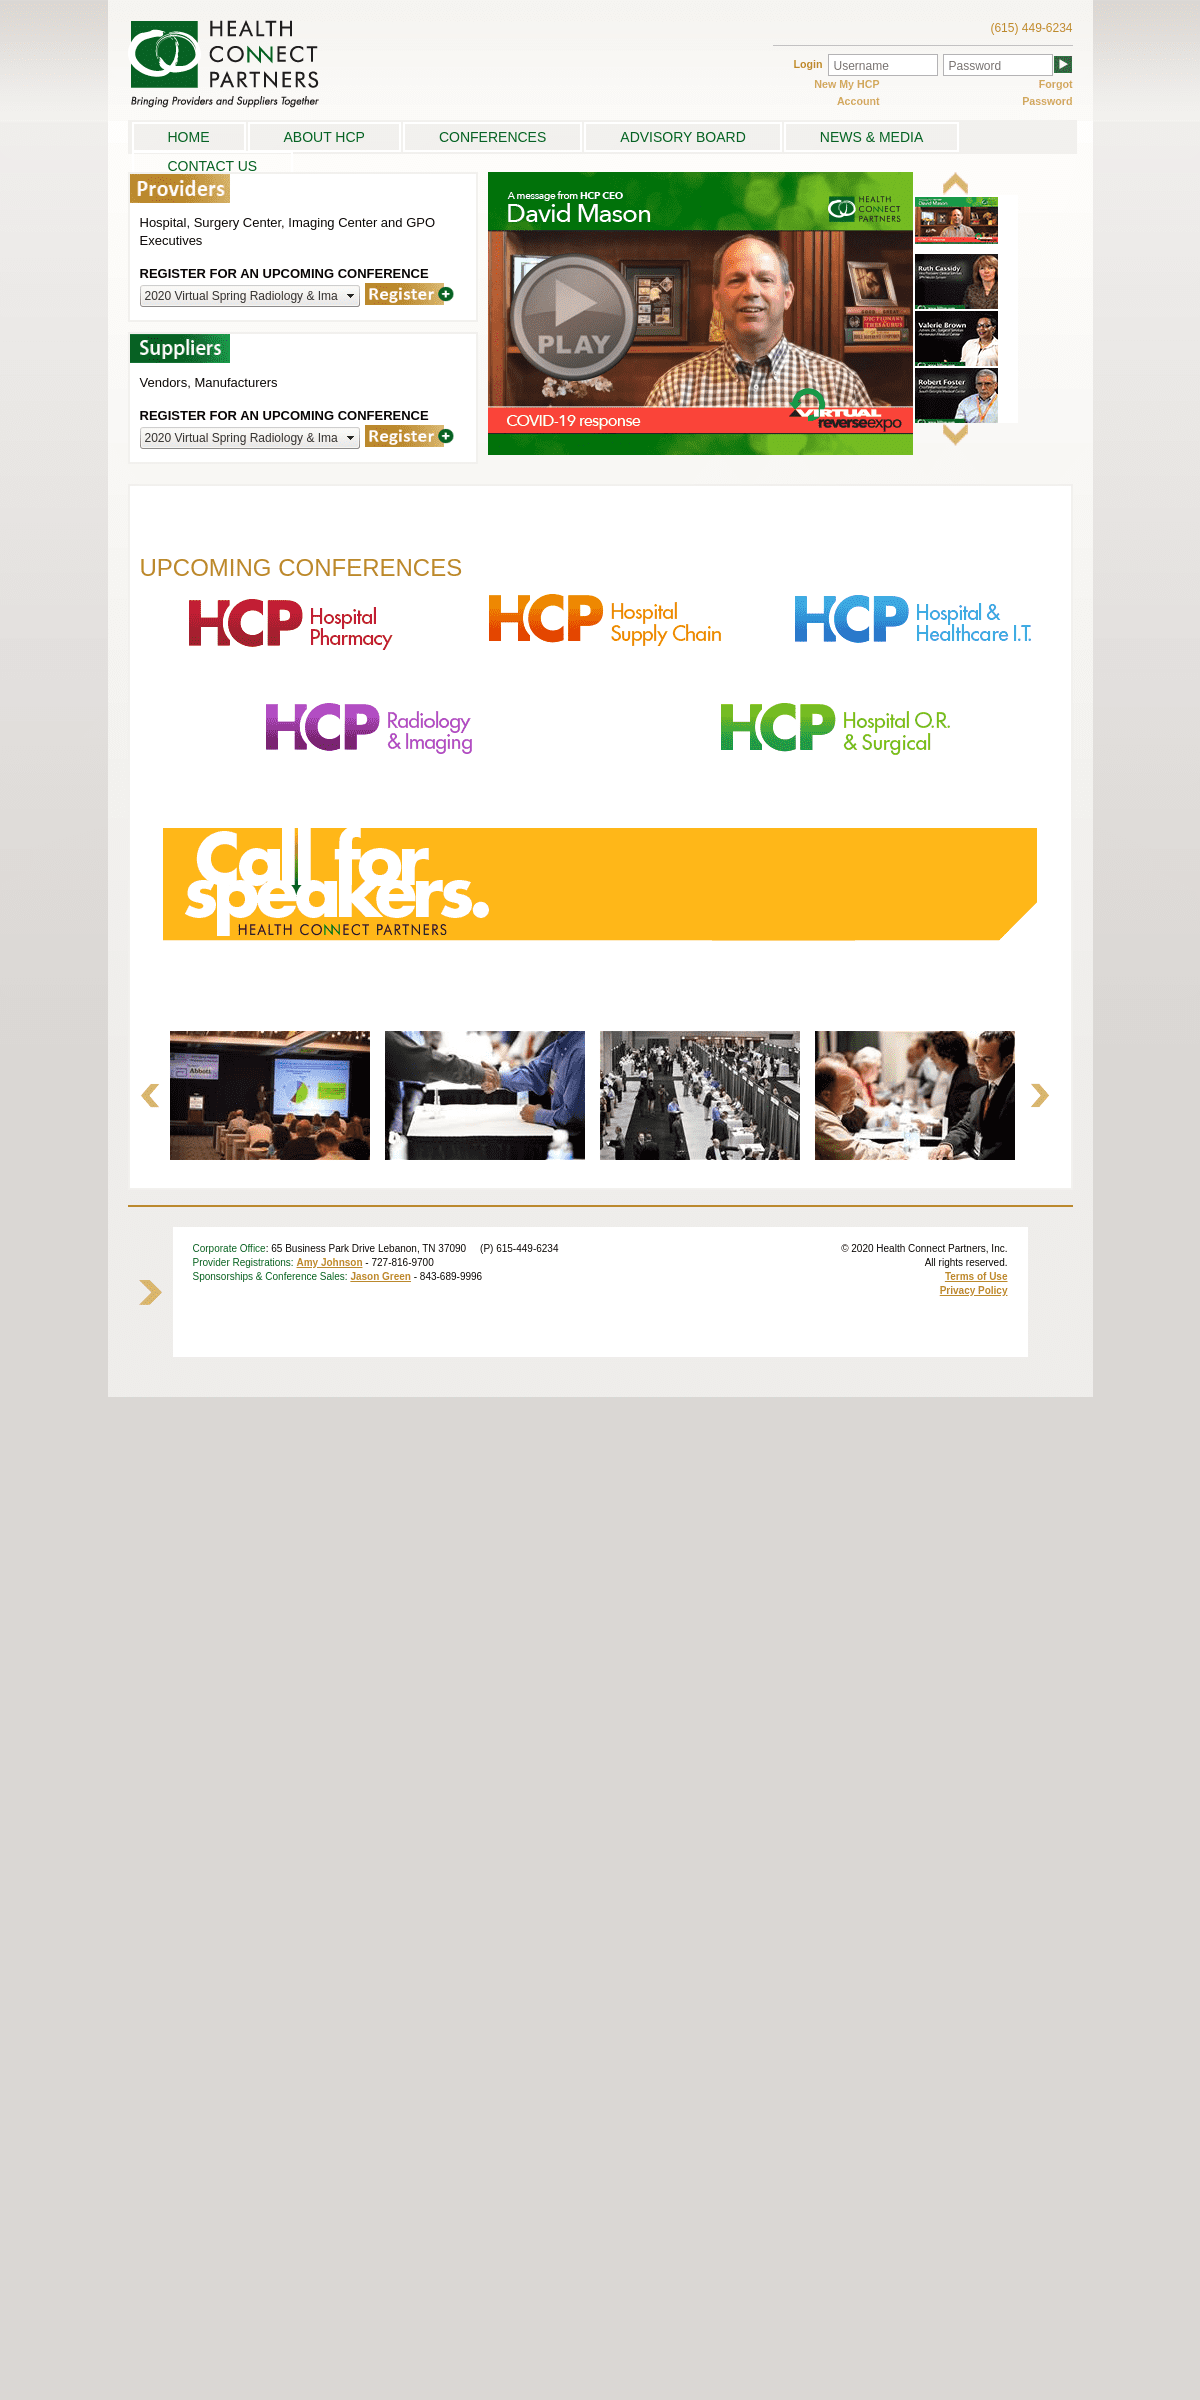 A complete backup of hlthcp.com